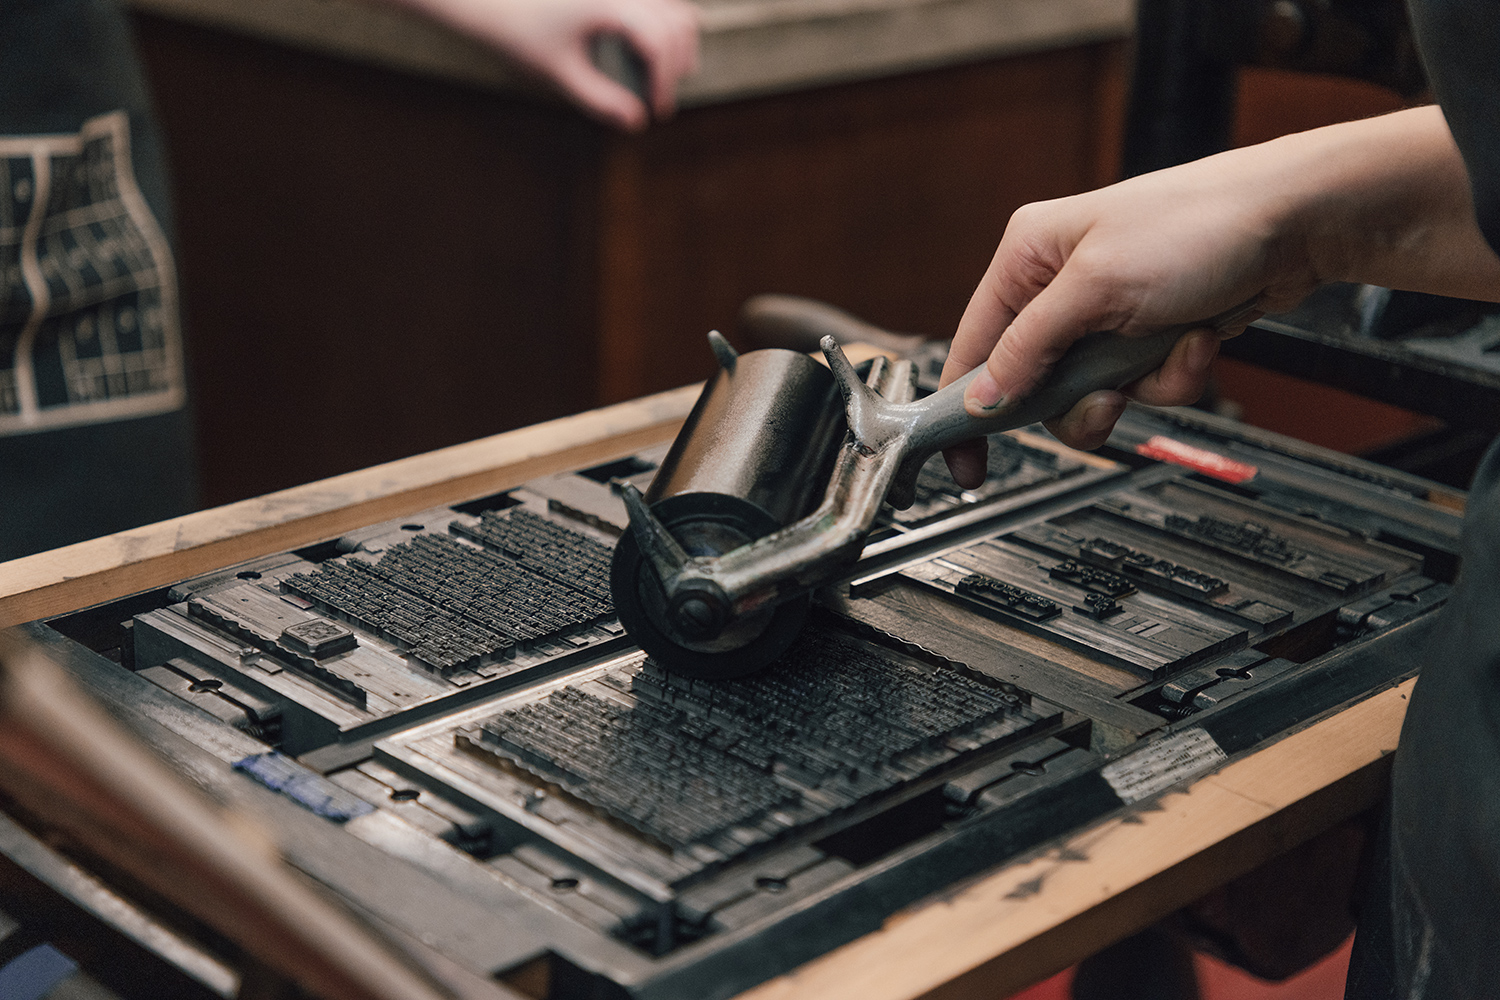 A small black ink roller moves over a tray of type, in preparation for printing.